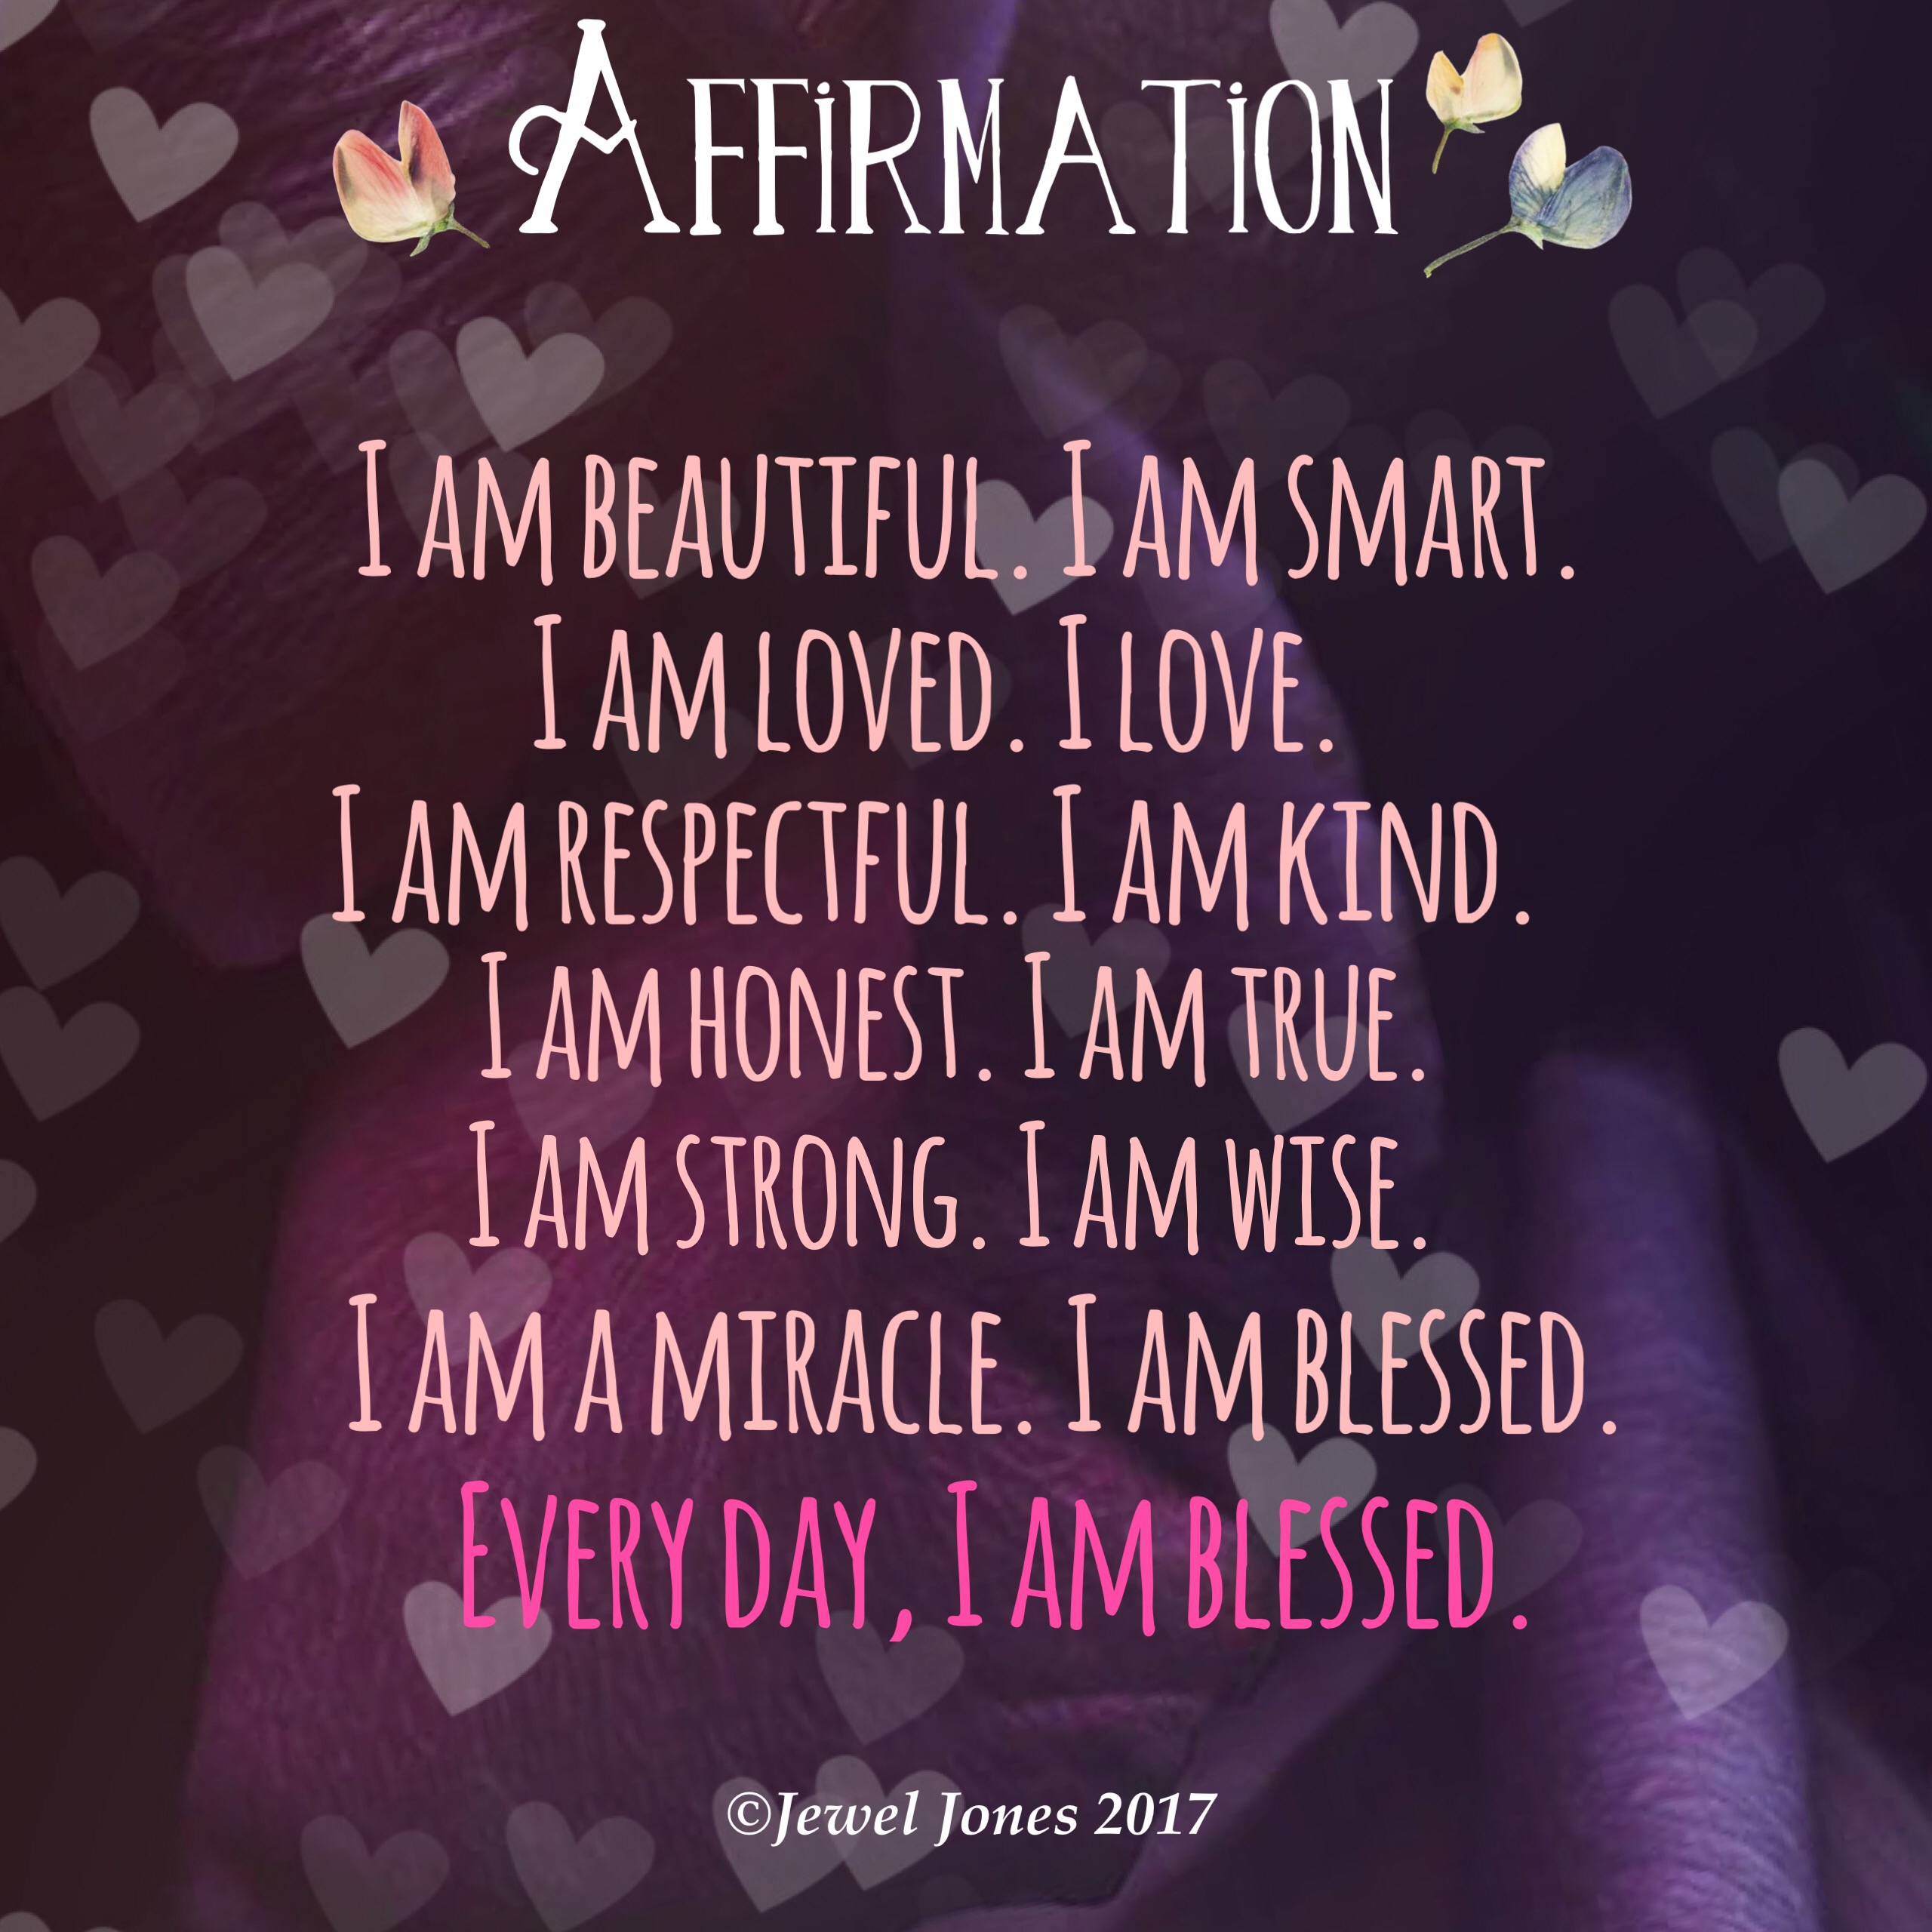 Here are my basic morning affirmations. I add to them when I am guided to. 